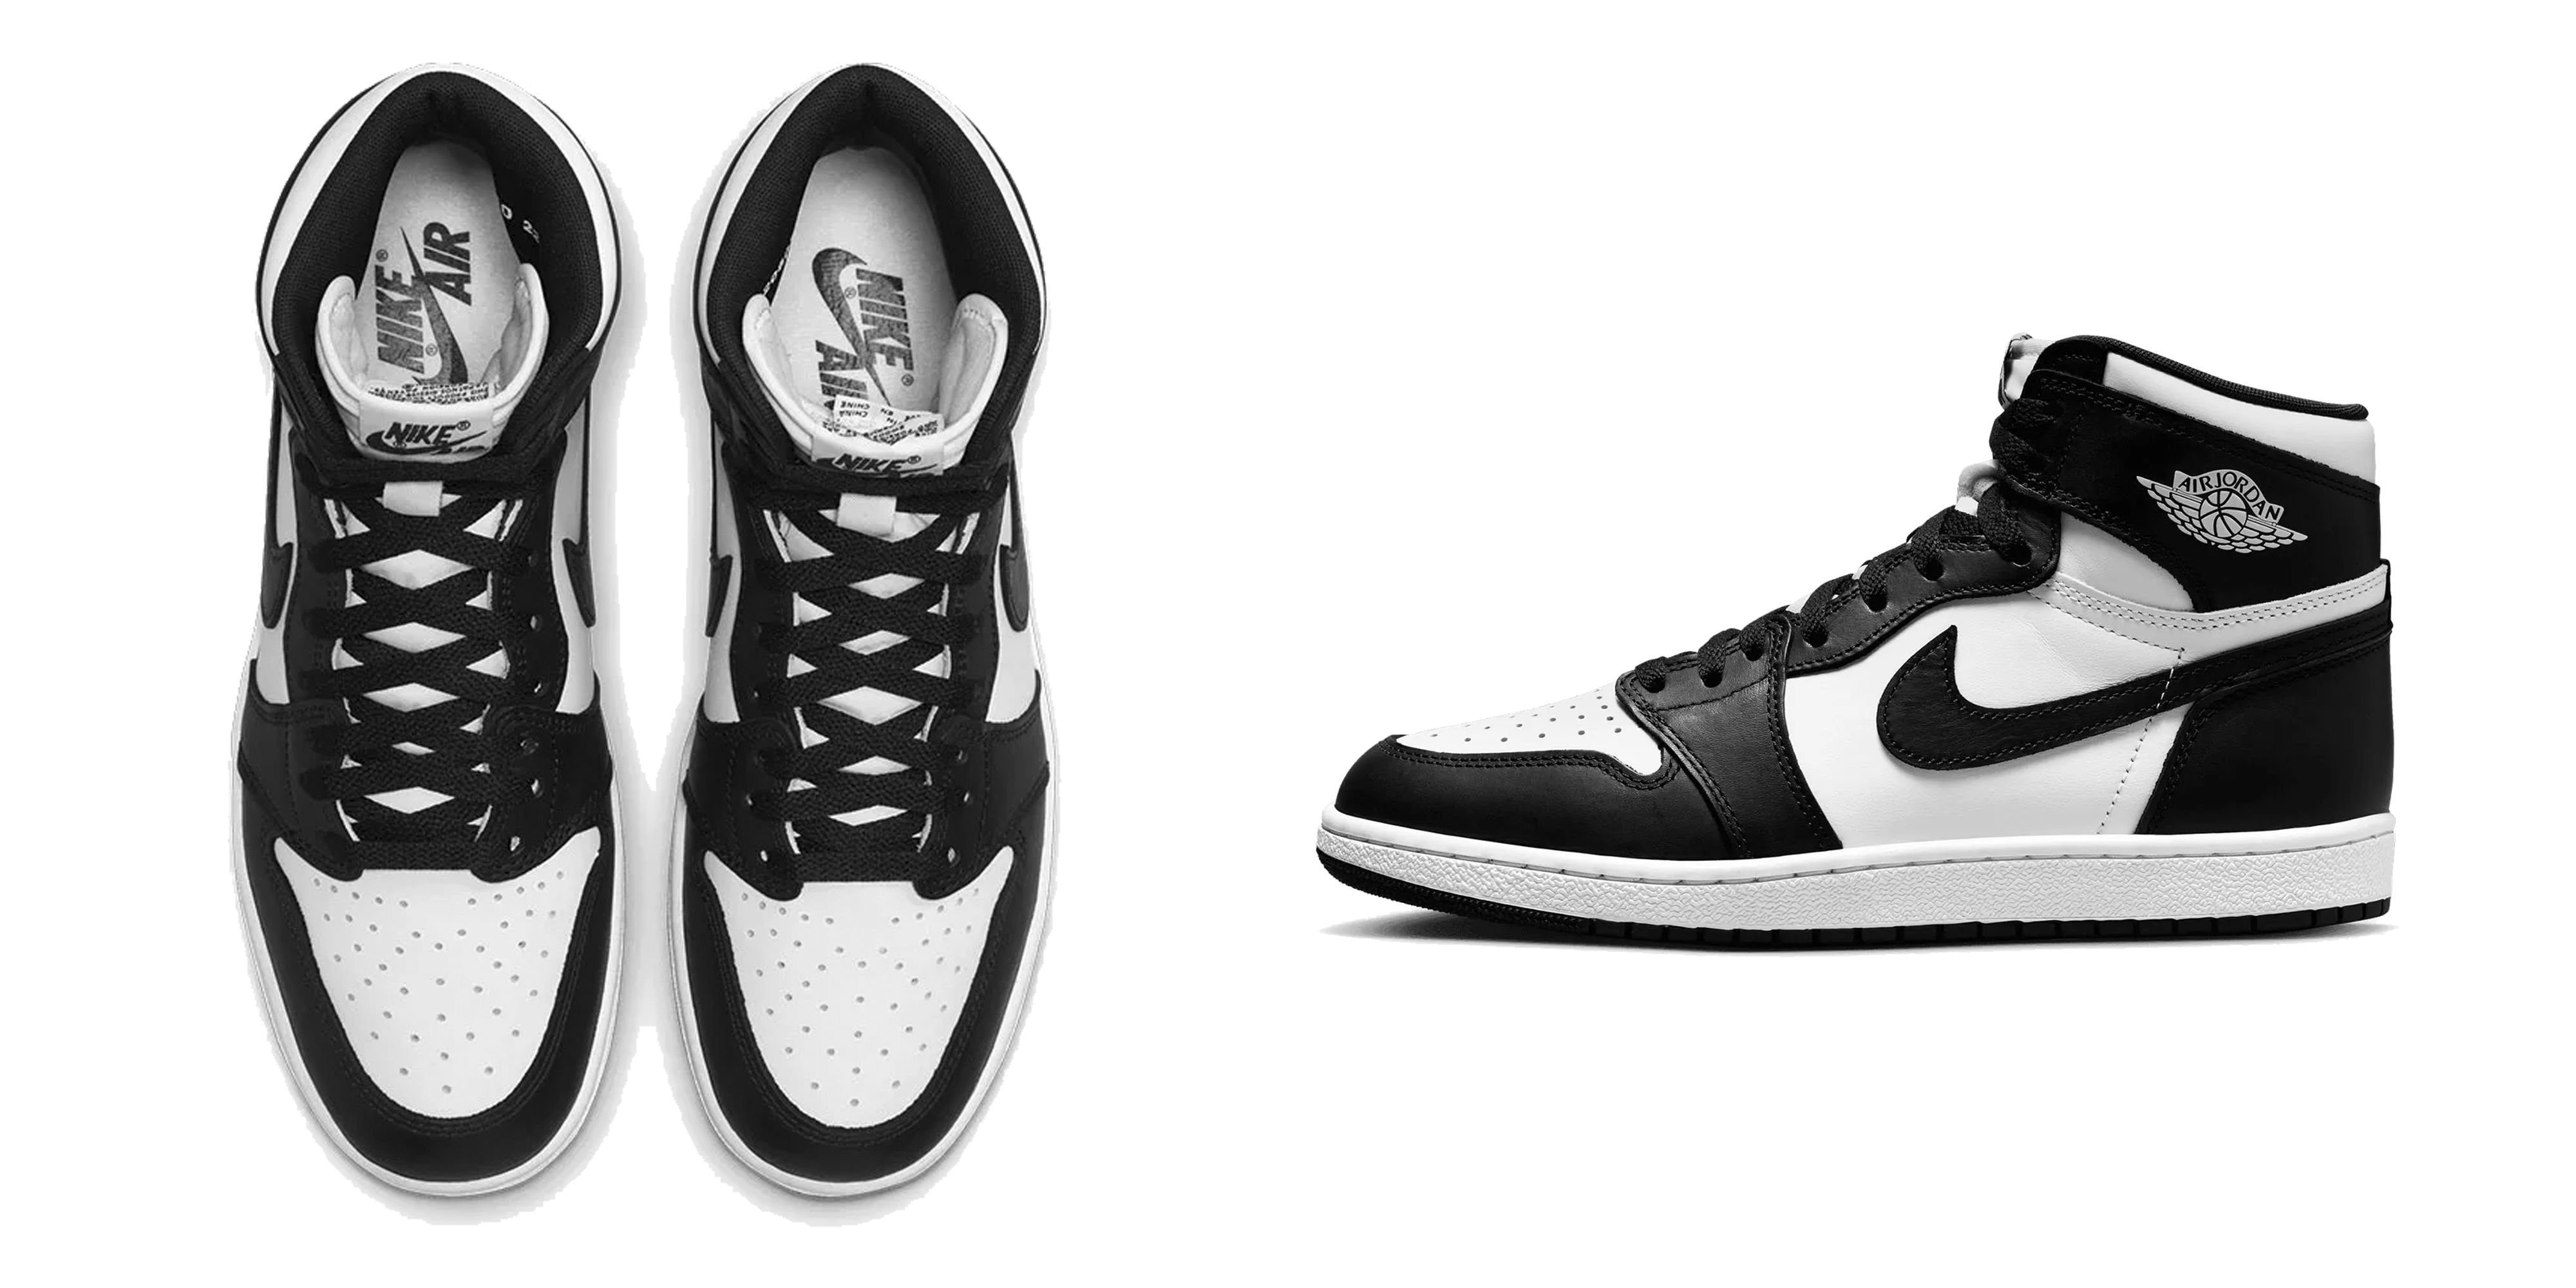 cost hybrid Barren The Air Jordan 1 High '85 'Black/White' Is About to Drop. Here's Everything  to Know